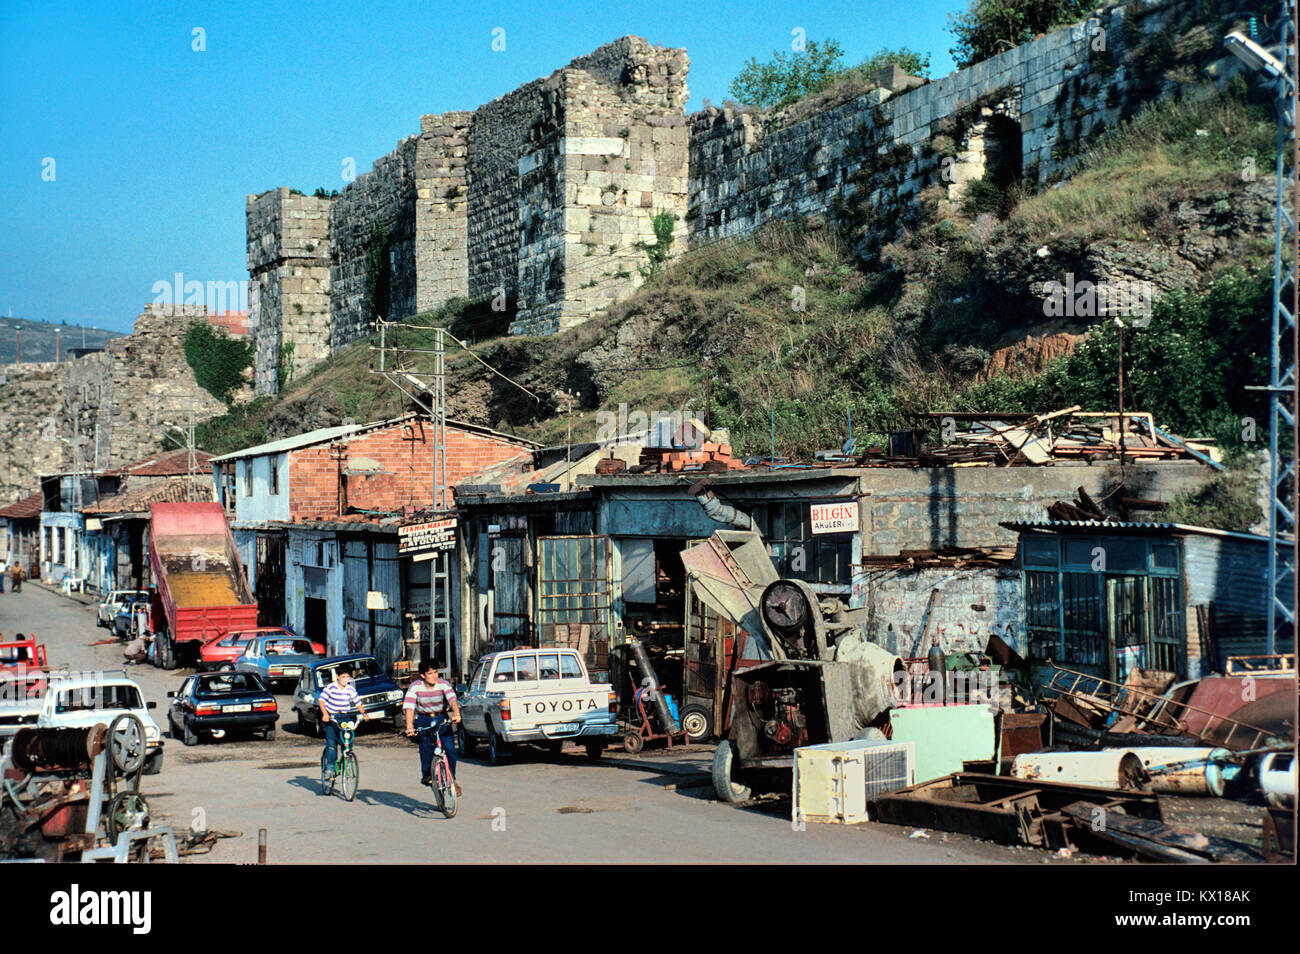 Old City Walls or Town Walls above Garages and Mechanics Workshops Sinop, ancient Sinope, Turkey Stock Photo